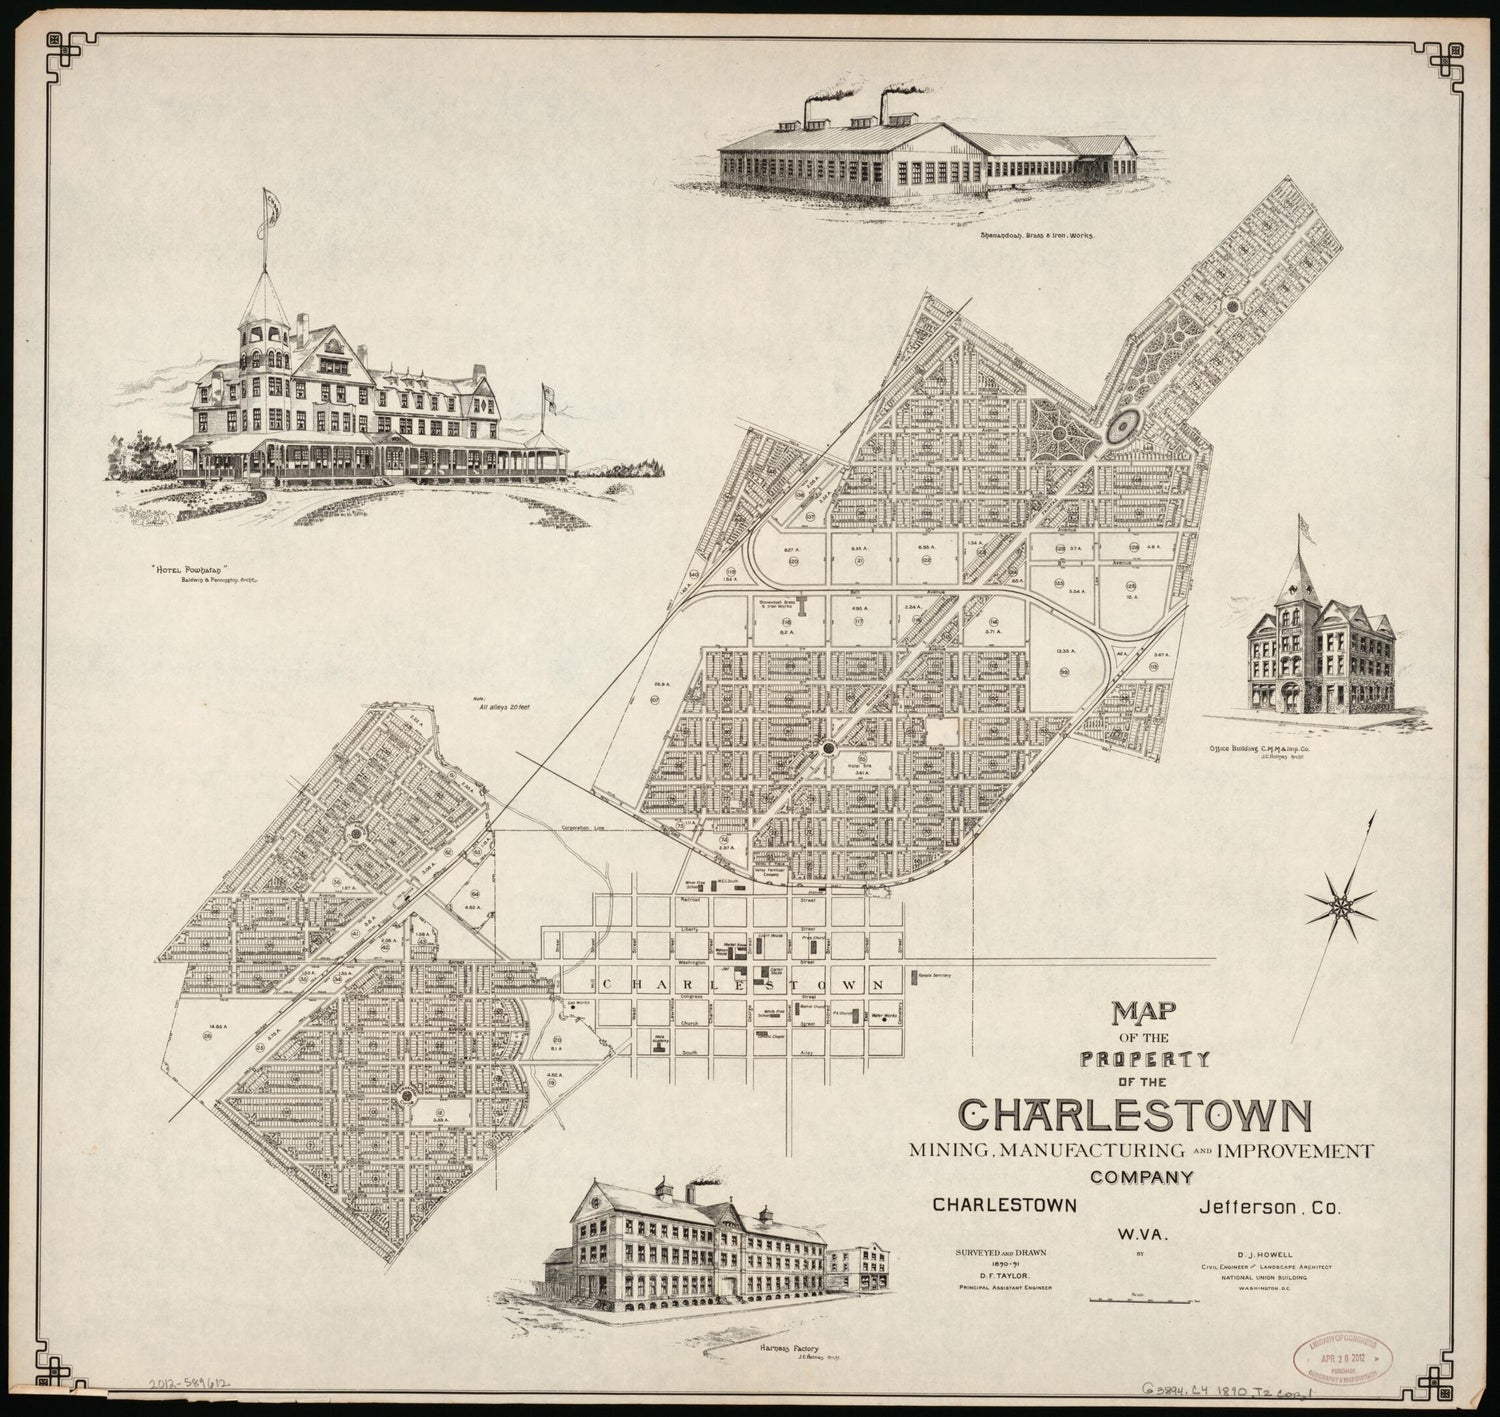 This old map of Map of the Property of the Charlestown Mining, Manufacturing and Improvement Company : Charlestown, Jefferson Co., W. VA from 1890 was created by D. J. Howell, D. F. Taylor in 1890